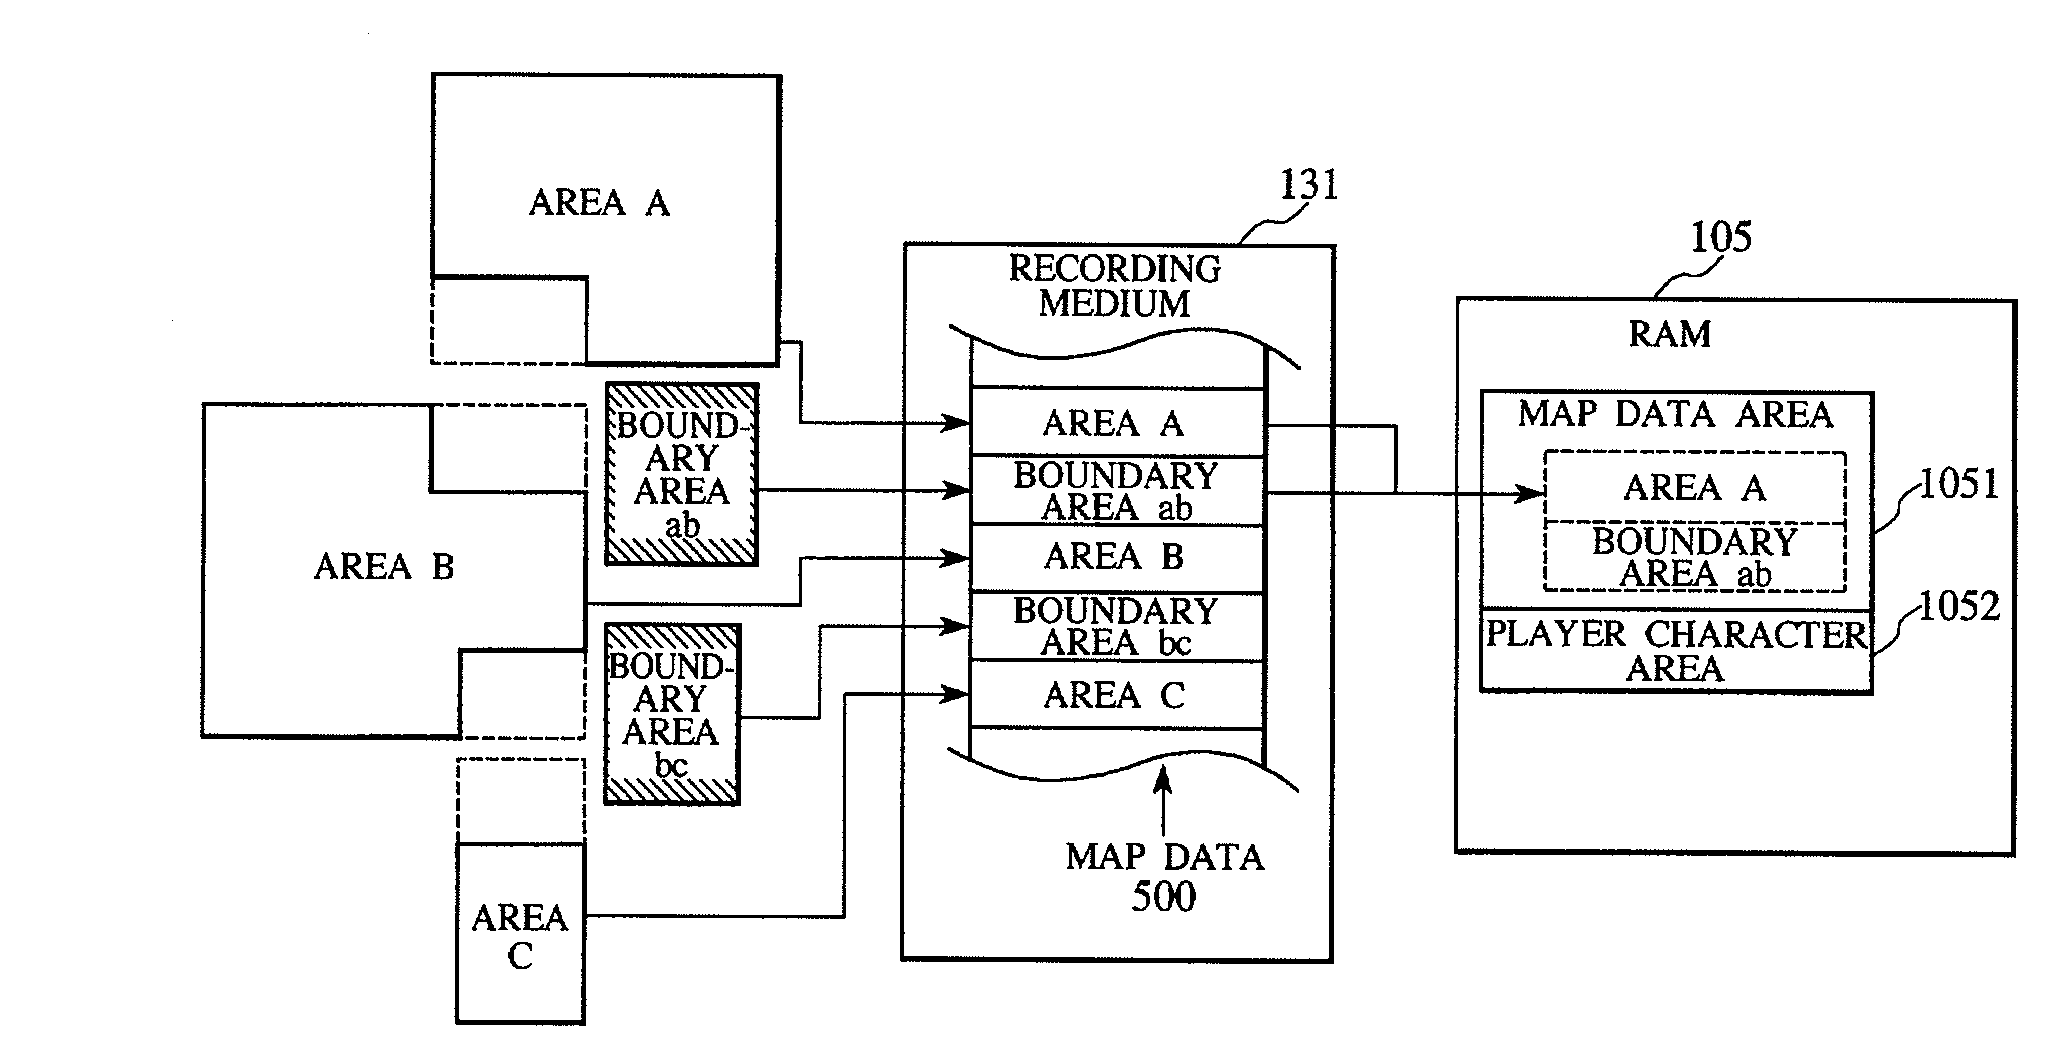 Video game apparatus for displaying information indicating boundary between fields